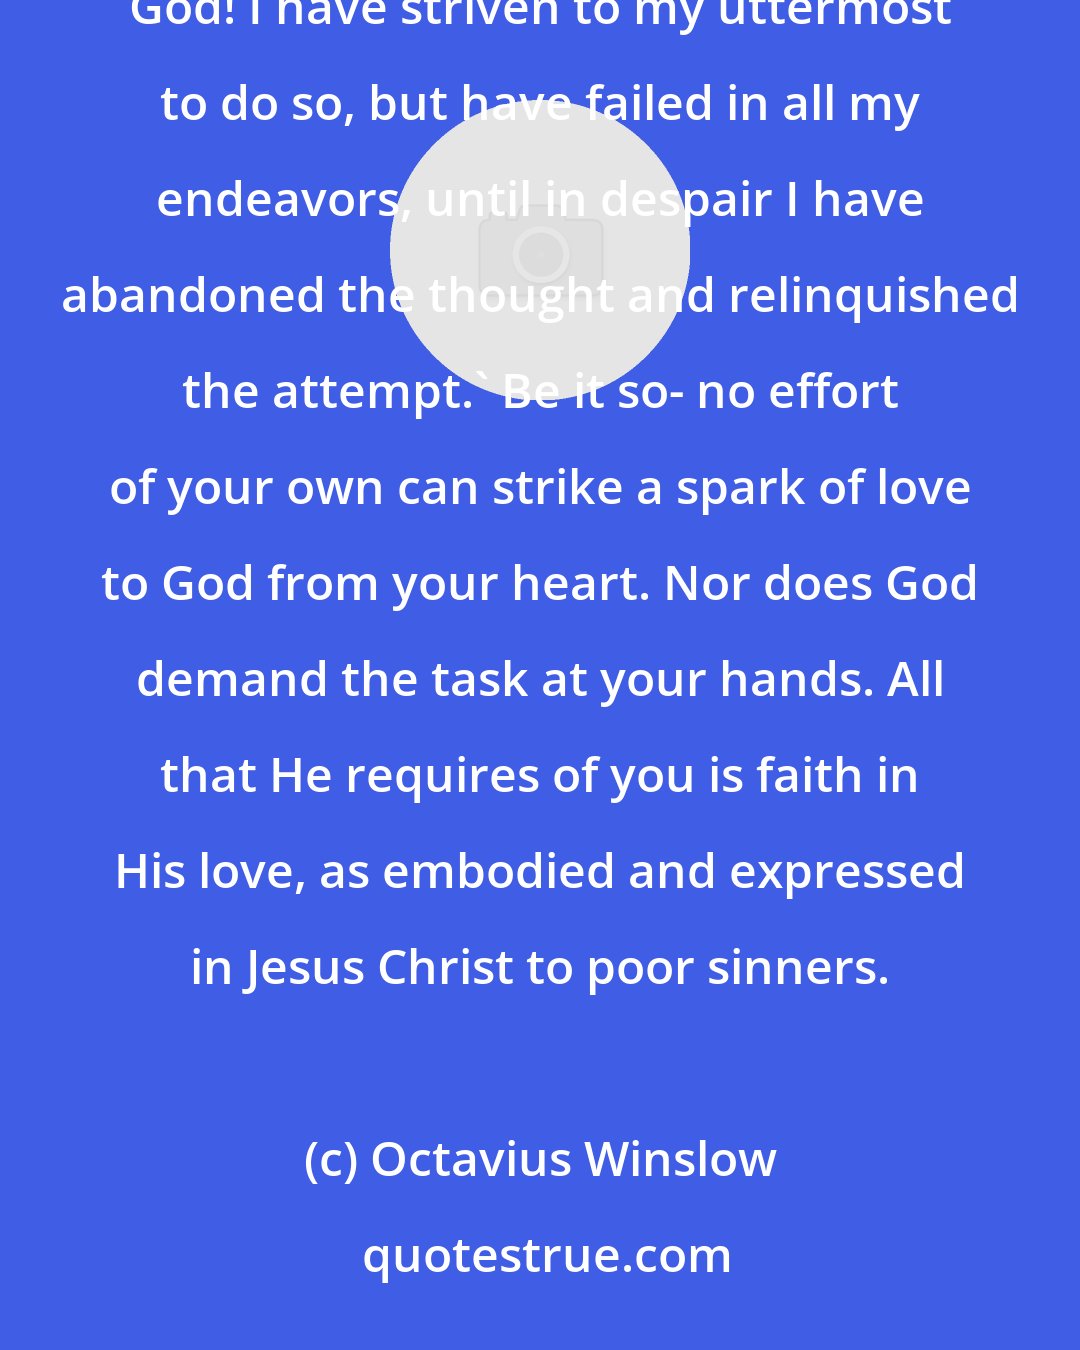 Octavius Winslow: You are not called to believe in your love to God, but in God's love to you! Do not argue, 'I cannot love God! I have striven to my uttermost to do so, but have failed in all my endeavors, until in despair I have abandoned the thought and relinquished the attempt.' Be it so- no effort of your own can strike a spark of love to God from your heart. Nor does God demand the task at your hands. All that He requires of you is faith in His love, as embodied and expressed in Jesus Christ to poor sinners.